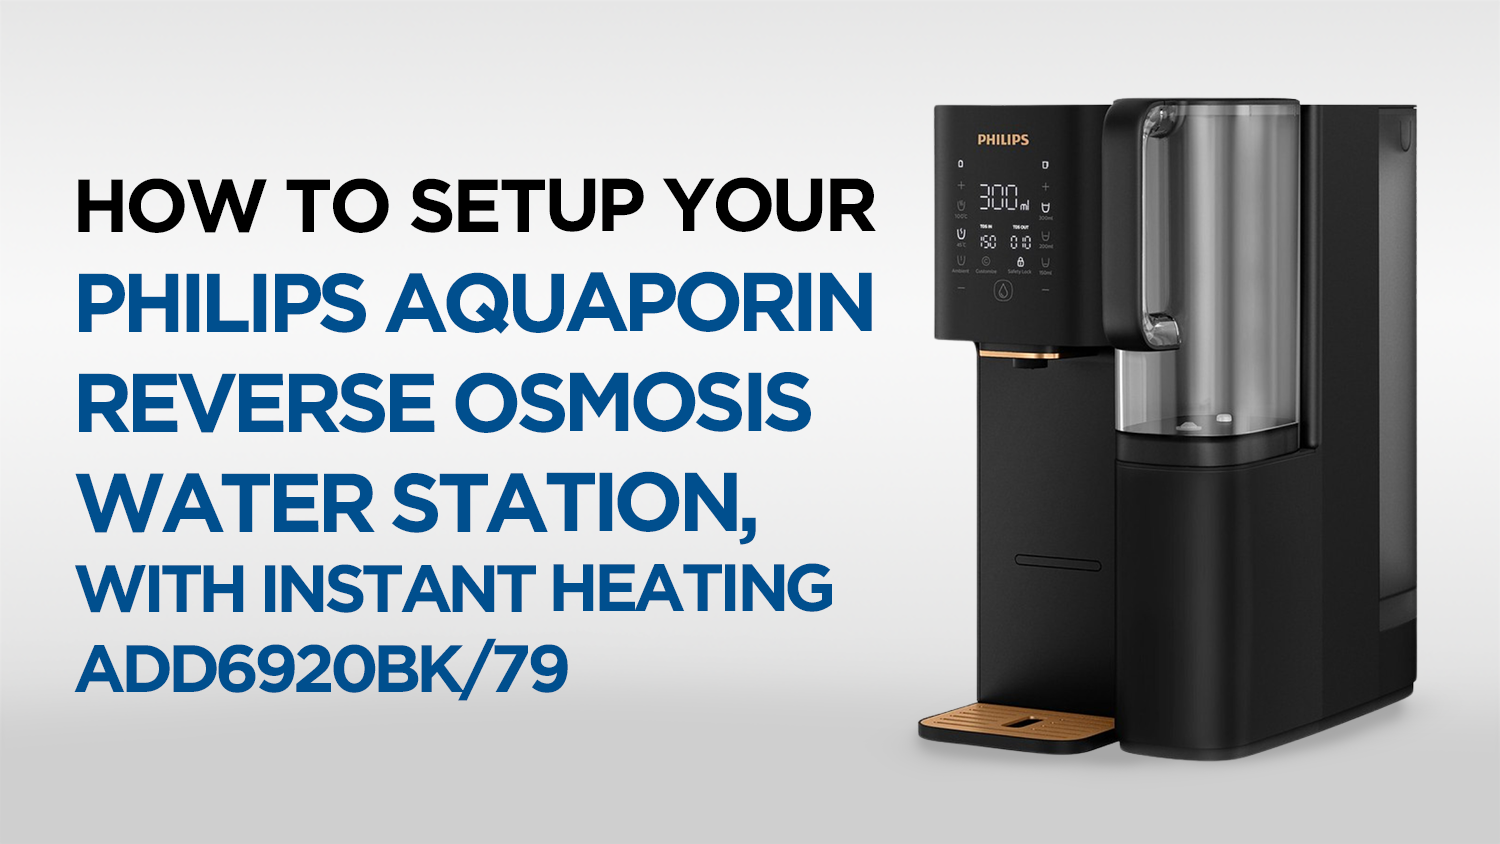 How to Set Up Your Philips Aquaporin Reverse Osmosis Water Station, with instant heating ADD6920BK/79